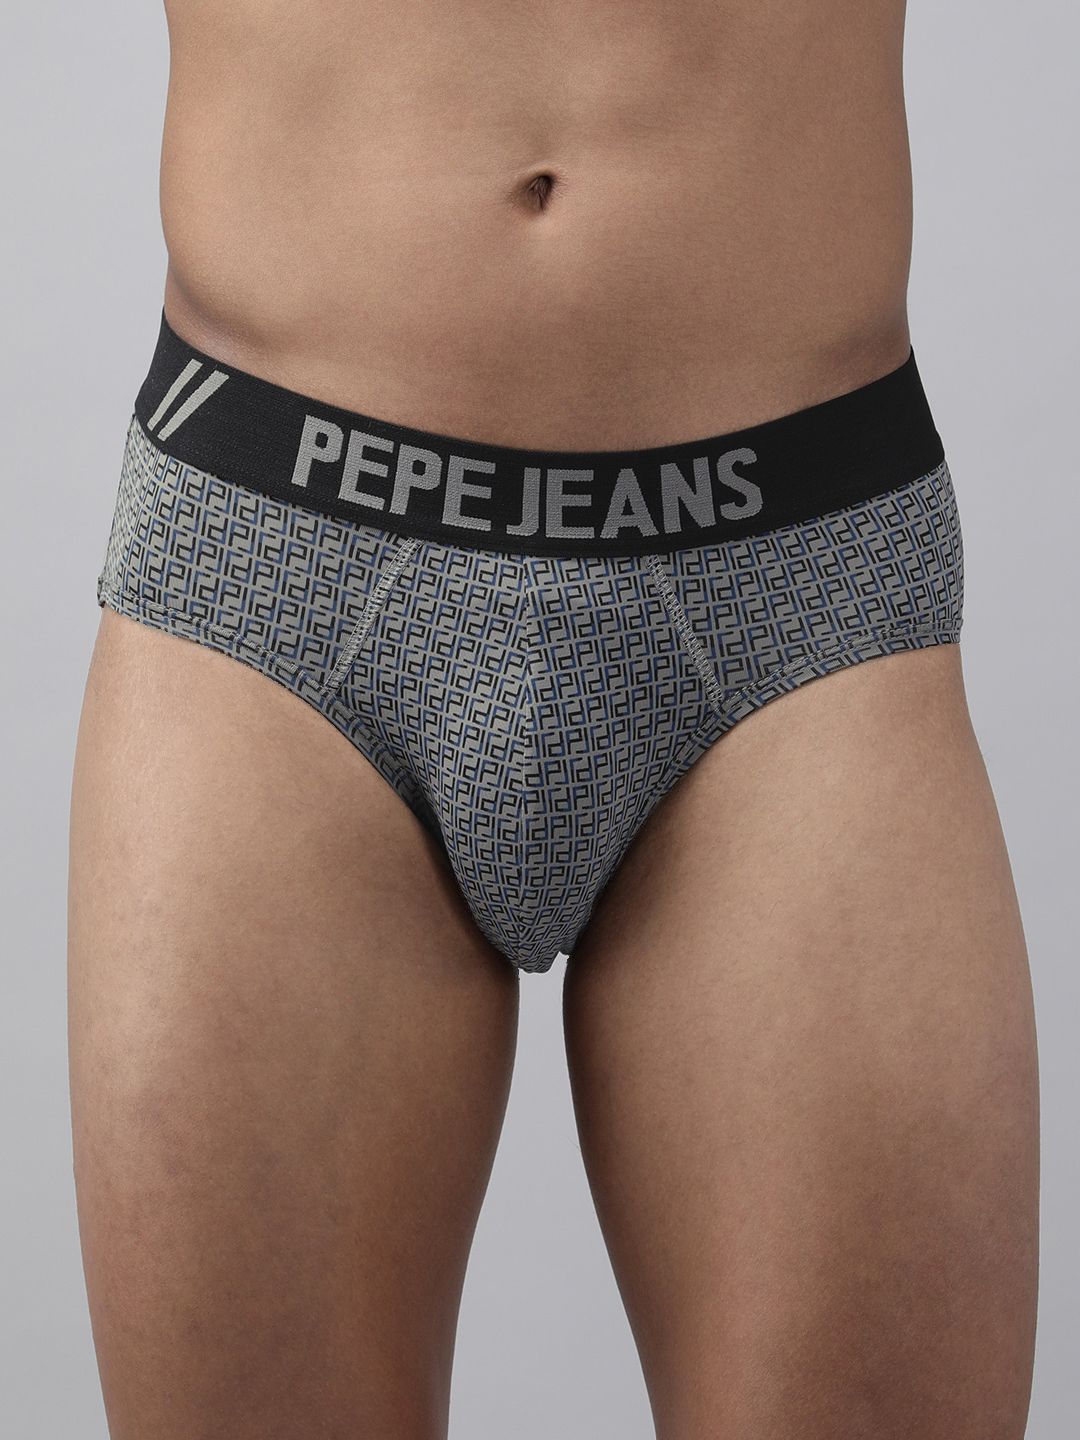 Pepe Jeans Green Printed Hipster Brief BGB02OLIVE AOP S - Price History